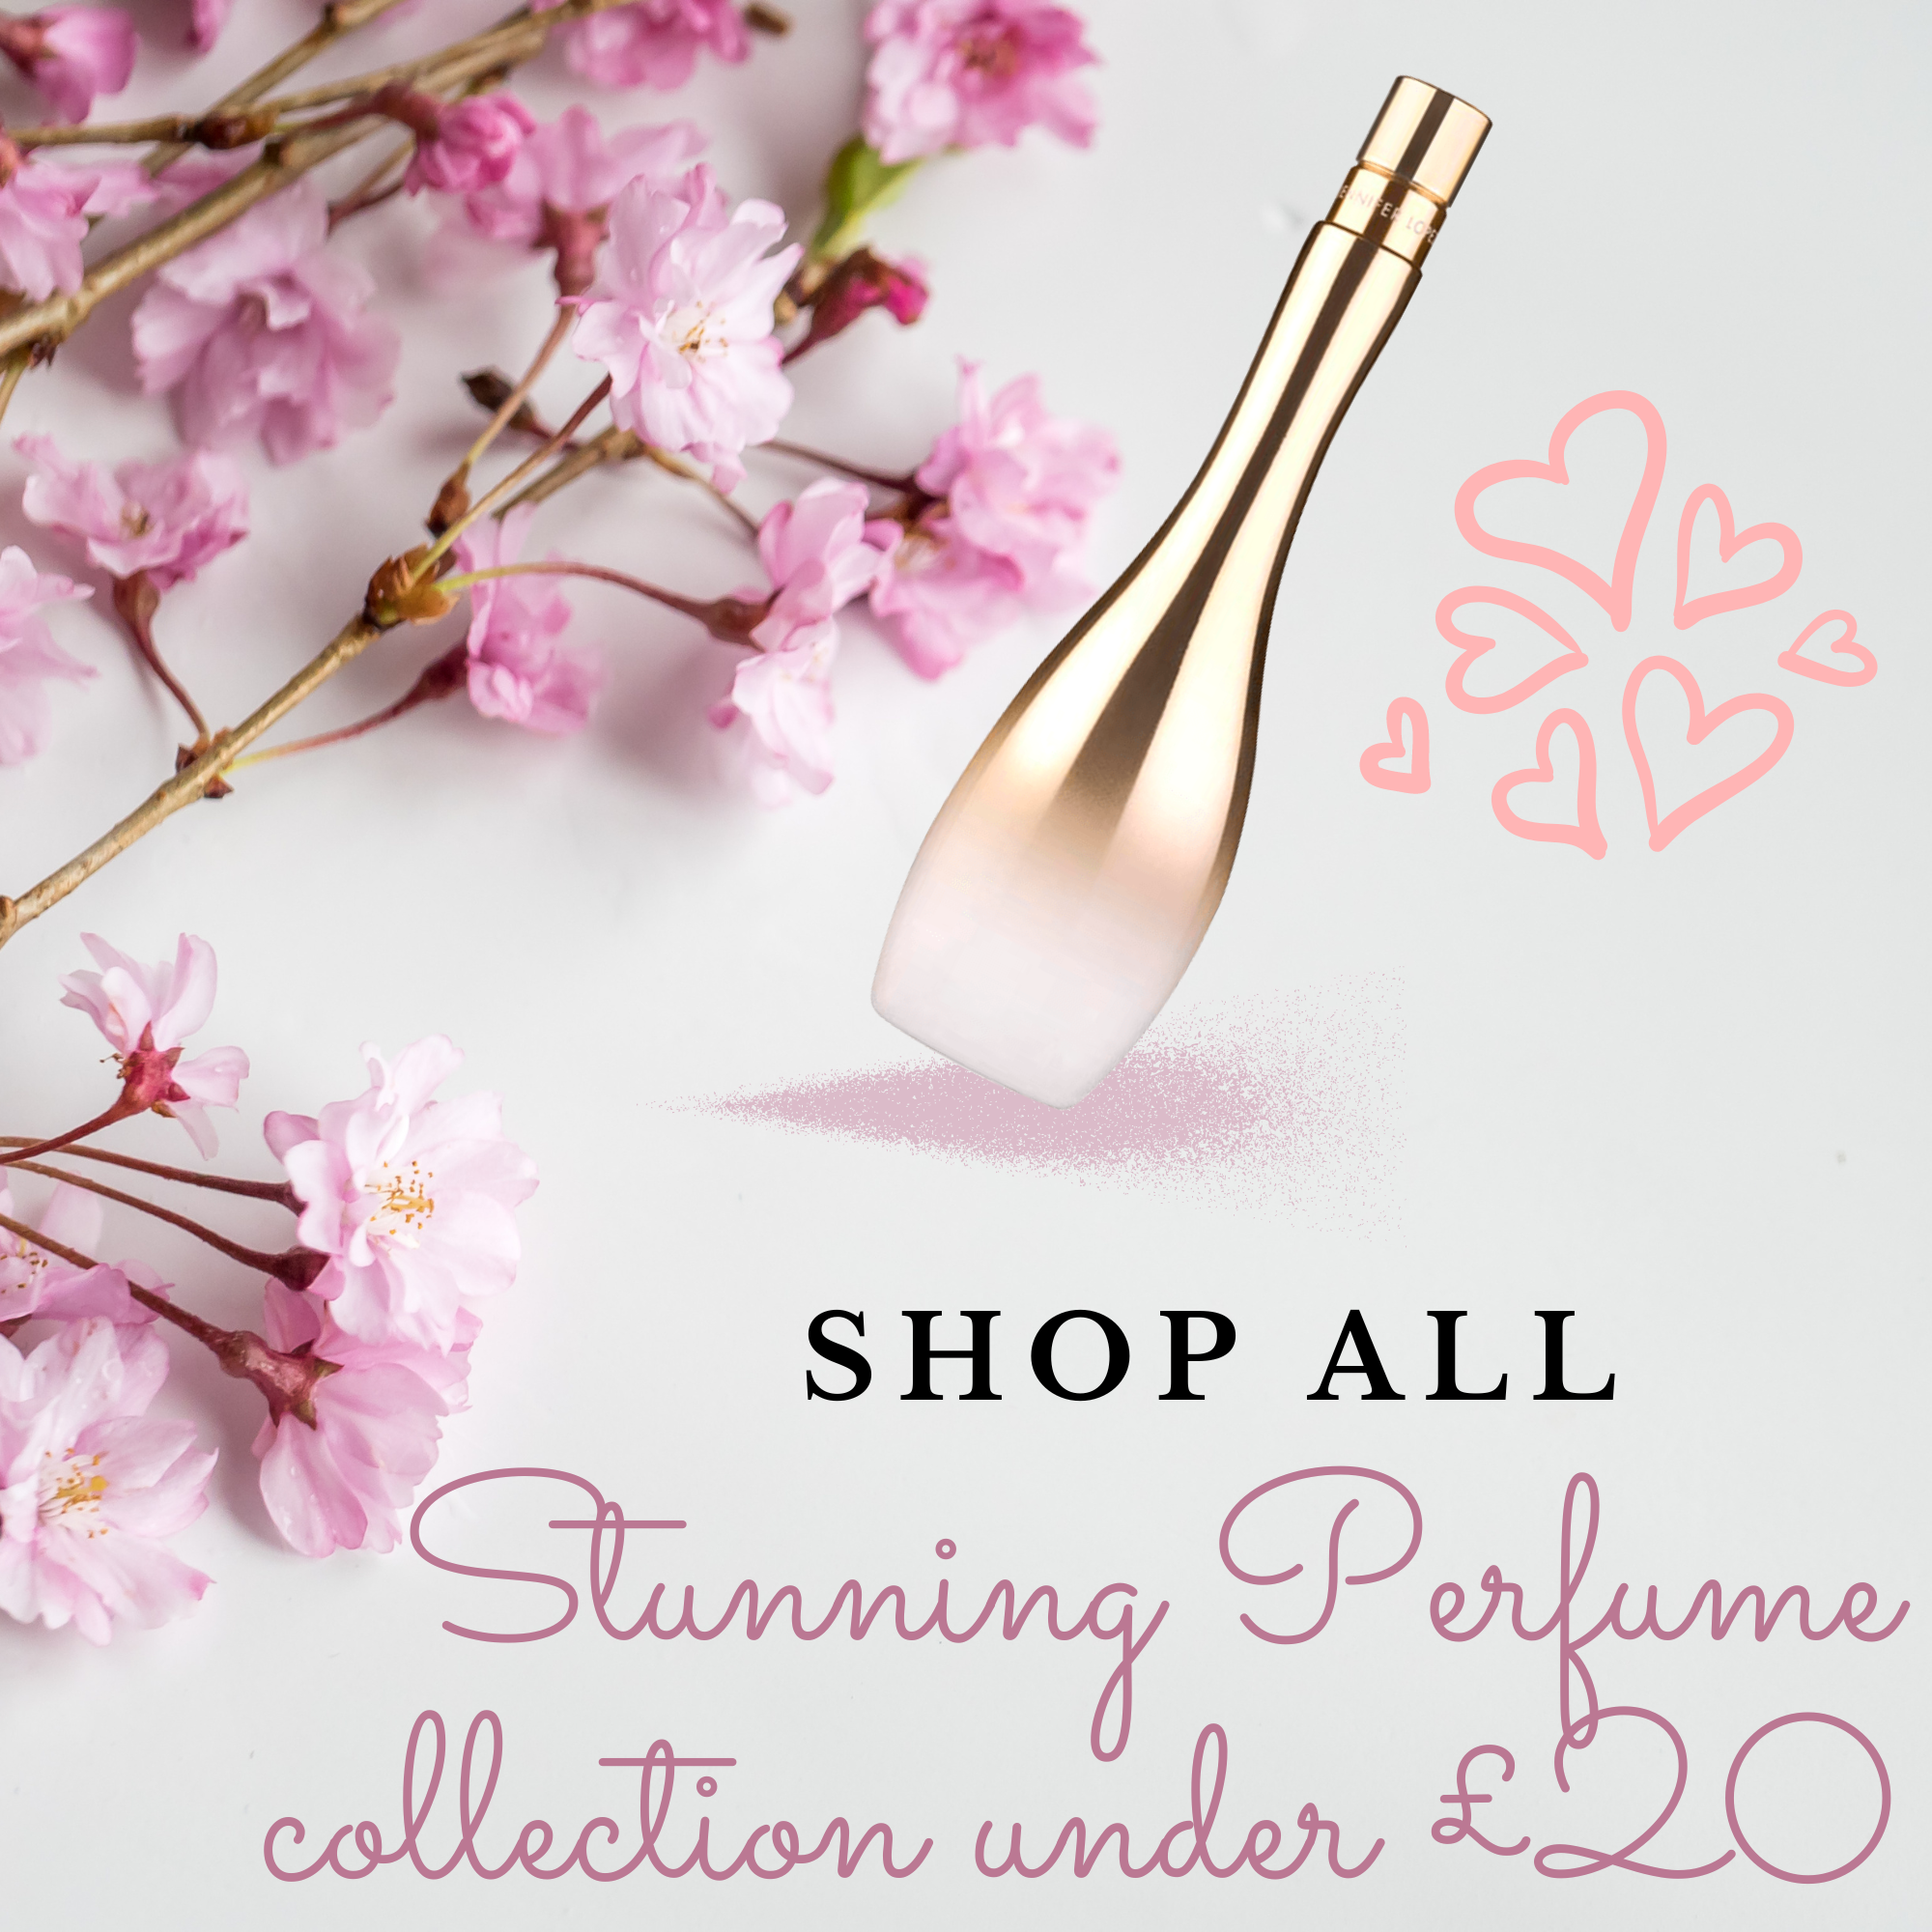 Perfumes collection under £20 at The Perfume World.